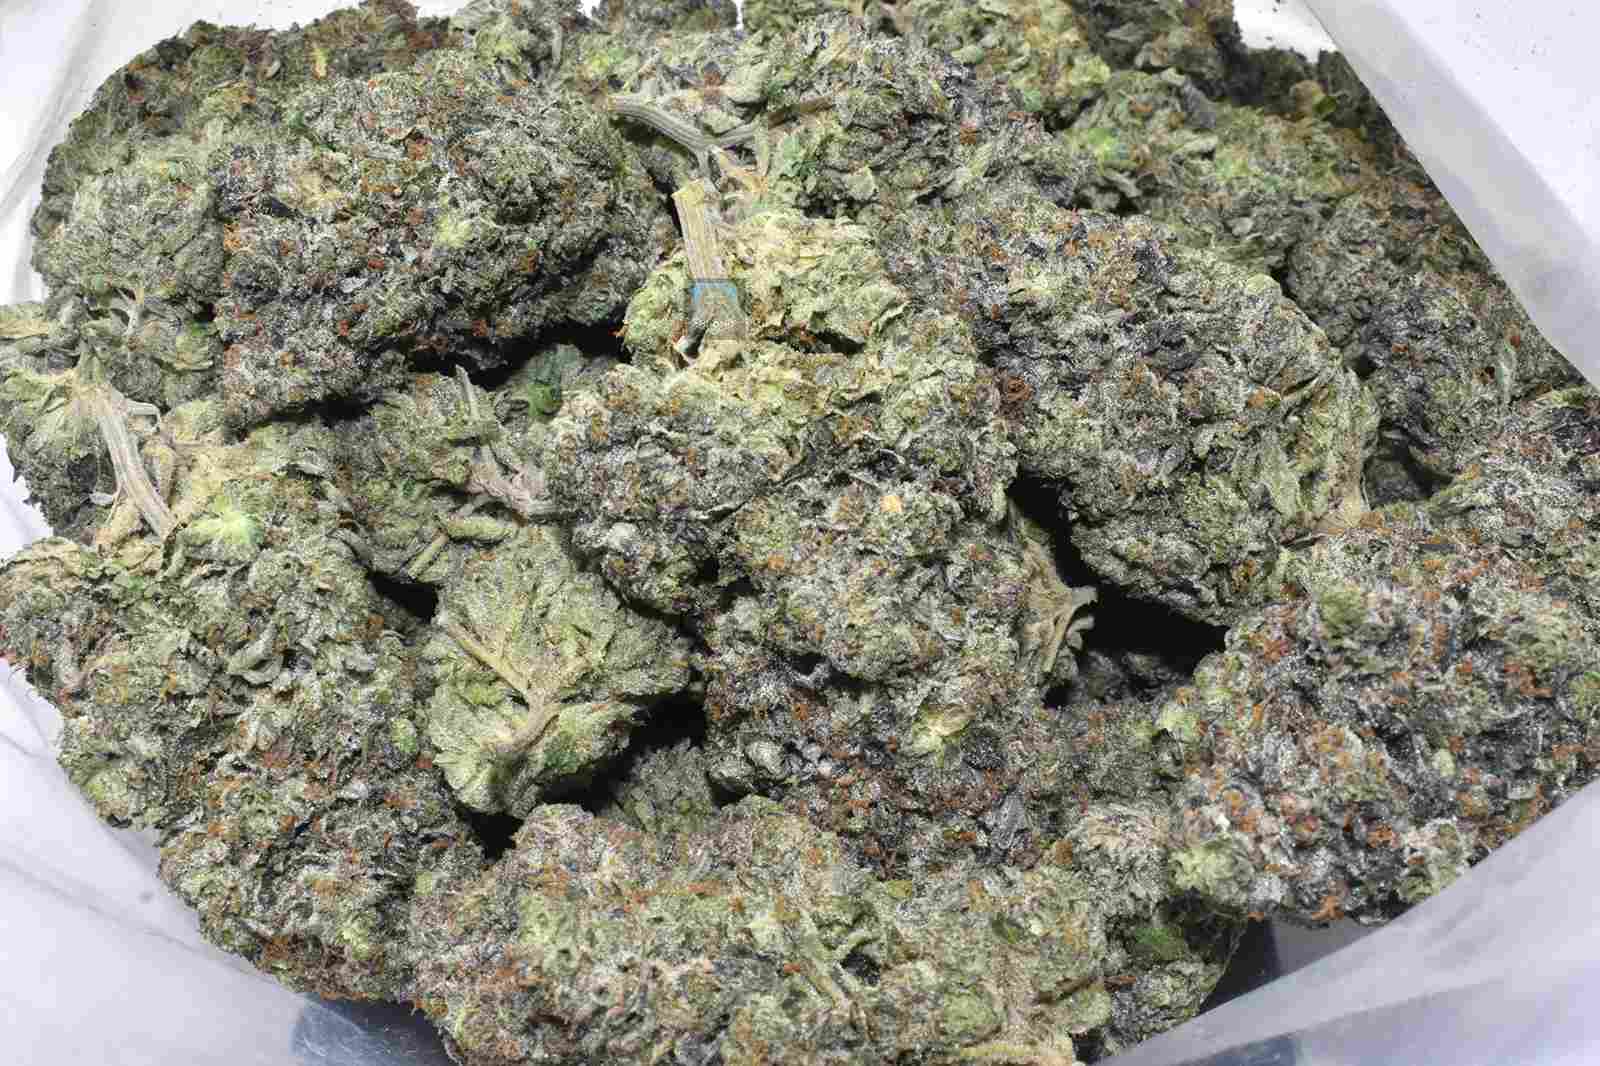 Death Bubba weed online Canada for sale online at Chronic Farms weed dispensary and mail order marijuana pot shop for BC cannabis, Alberta Cannabis, dab pen, shatter, and weed vapes.